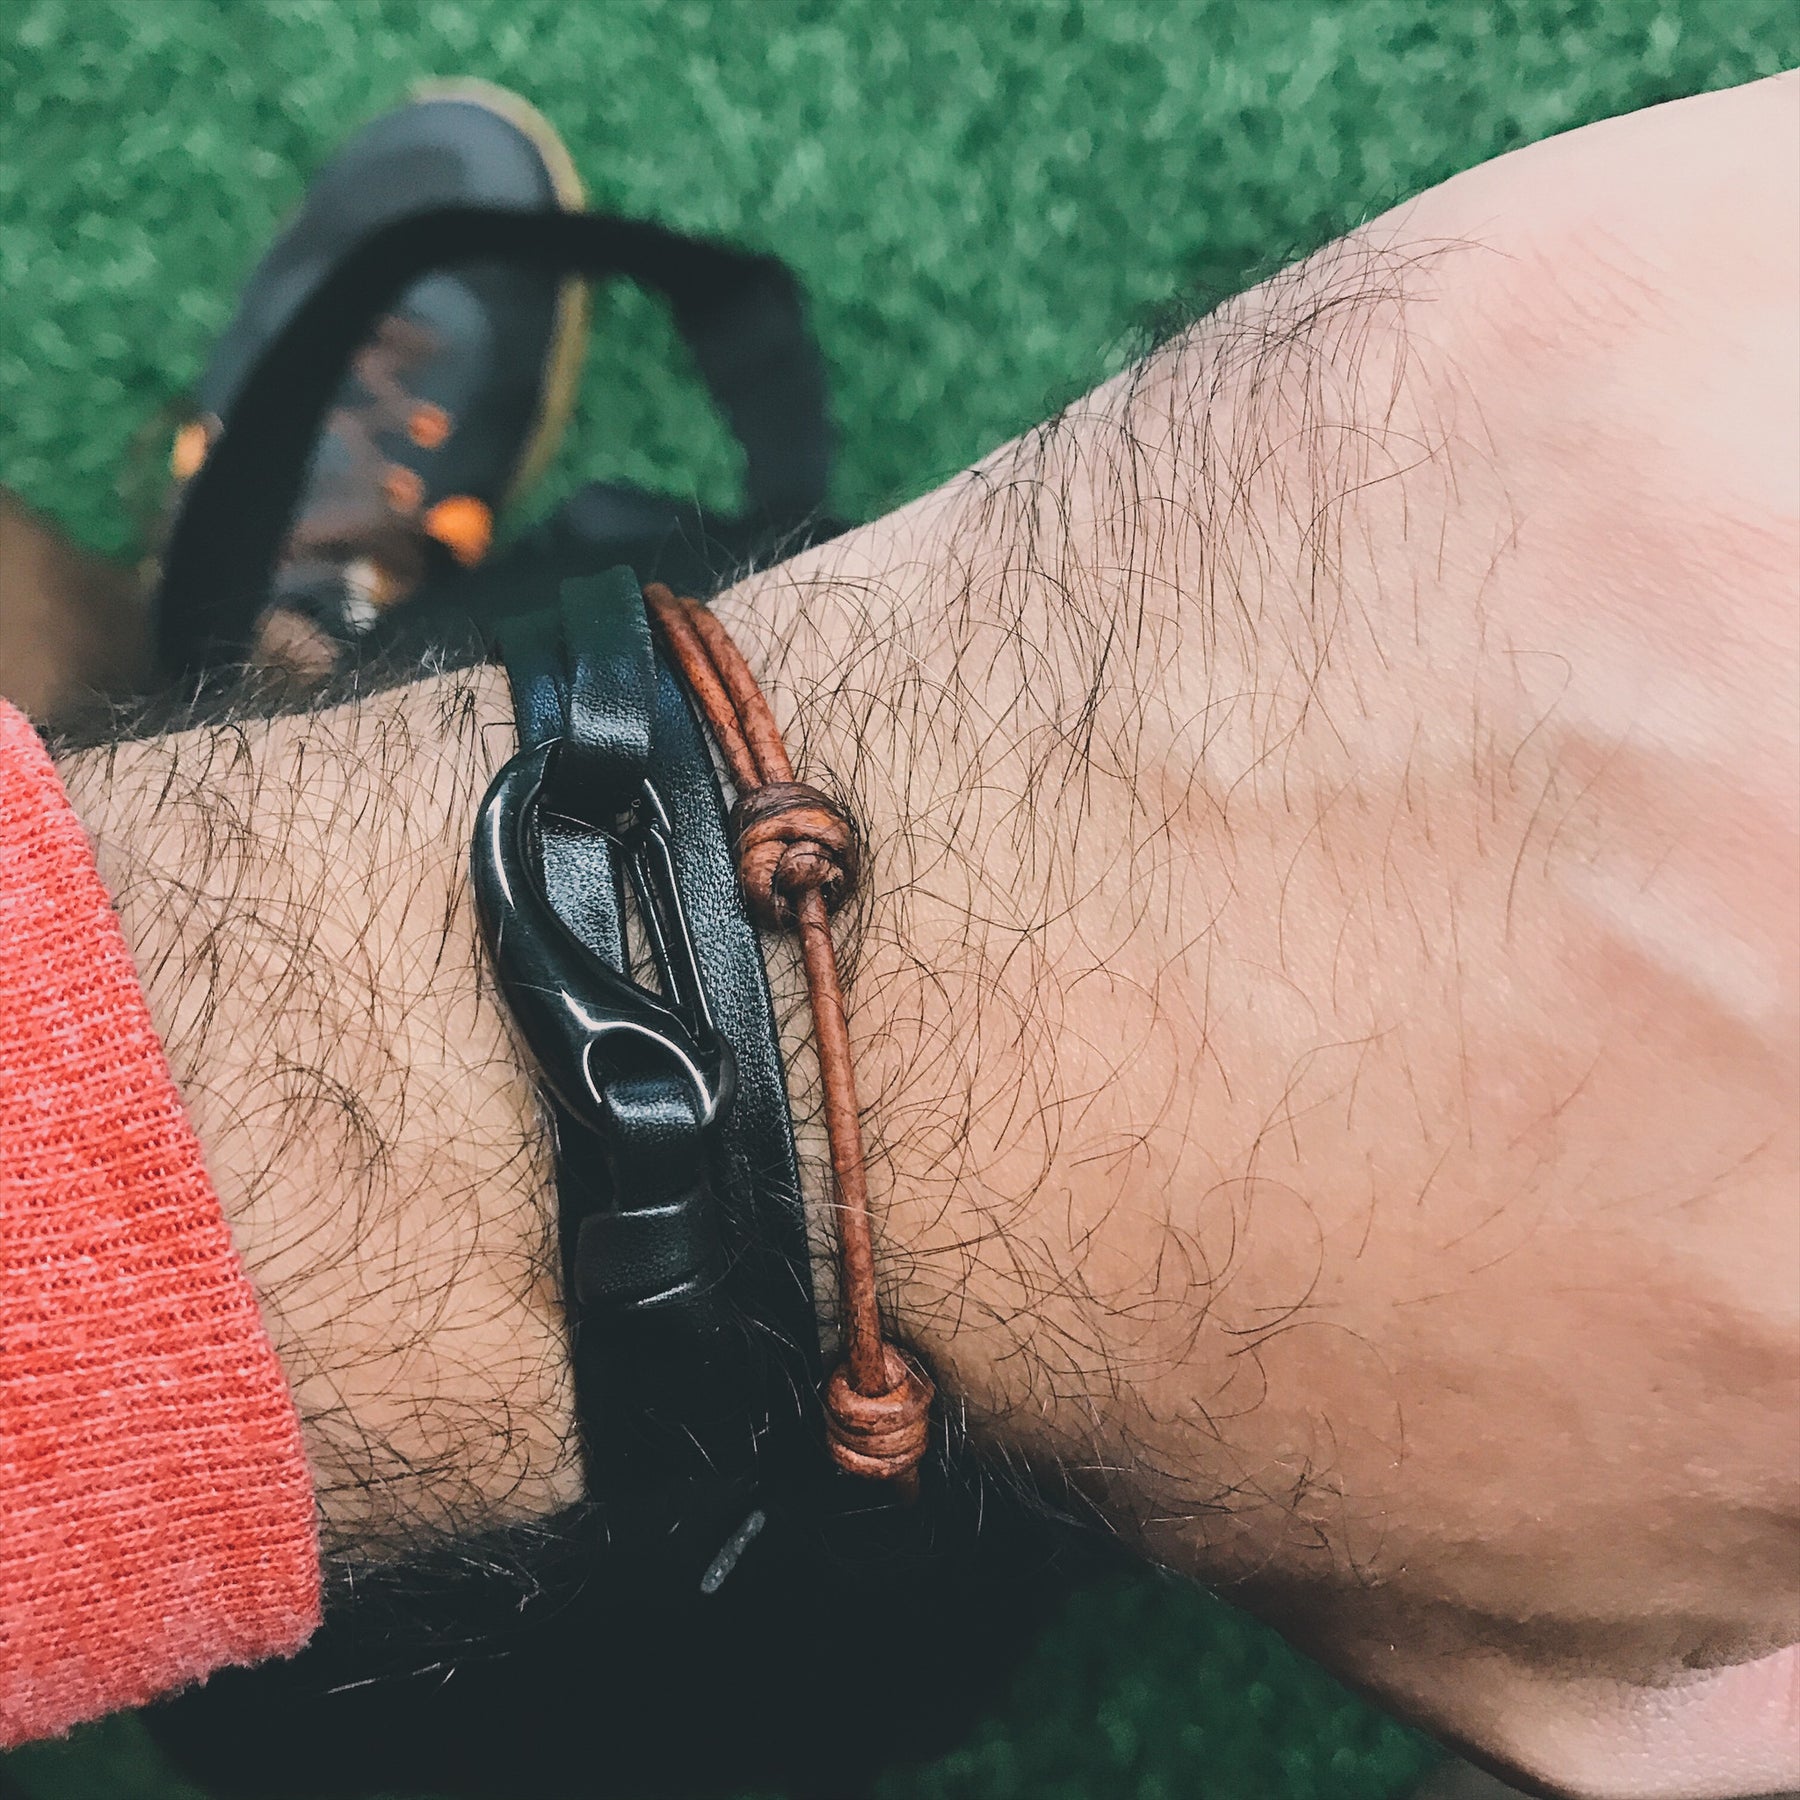 New colors for Men's Leather Bracelets coming soon!